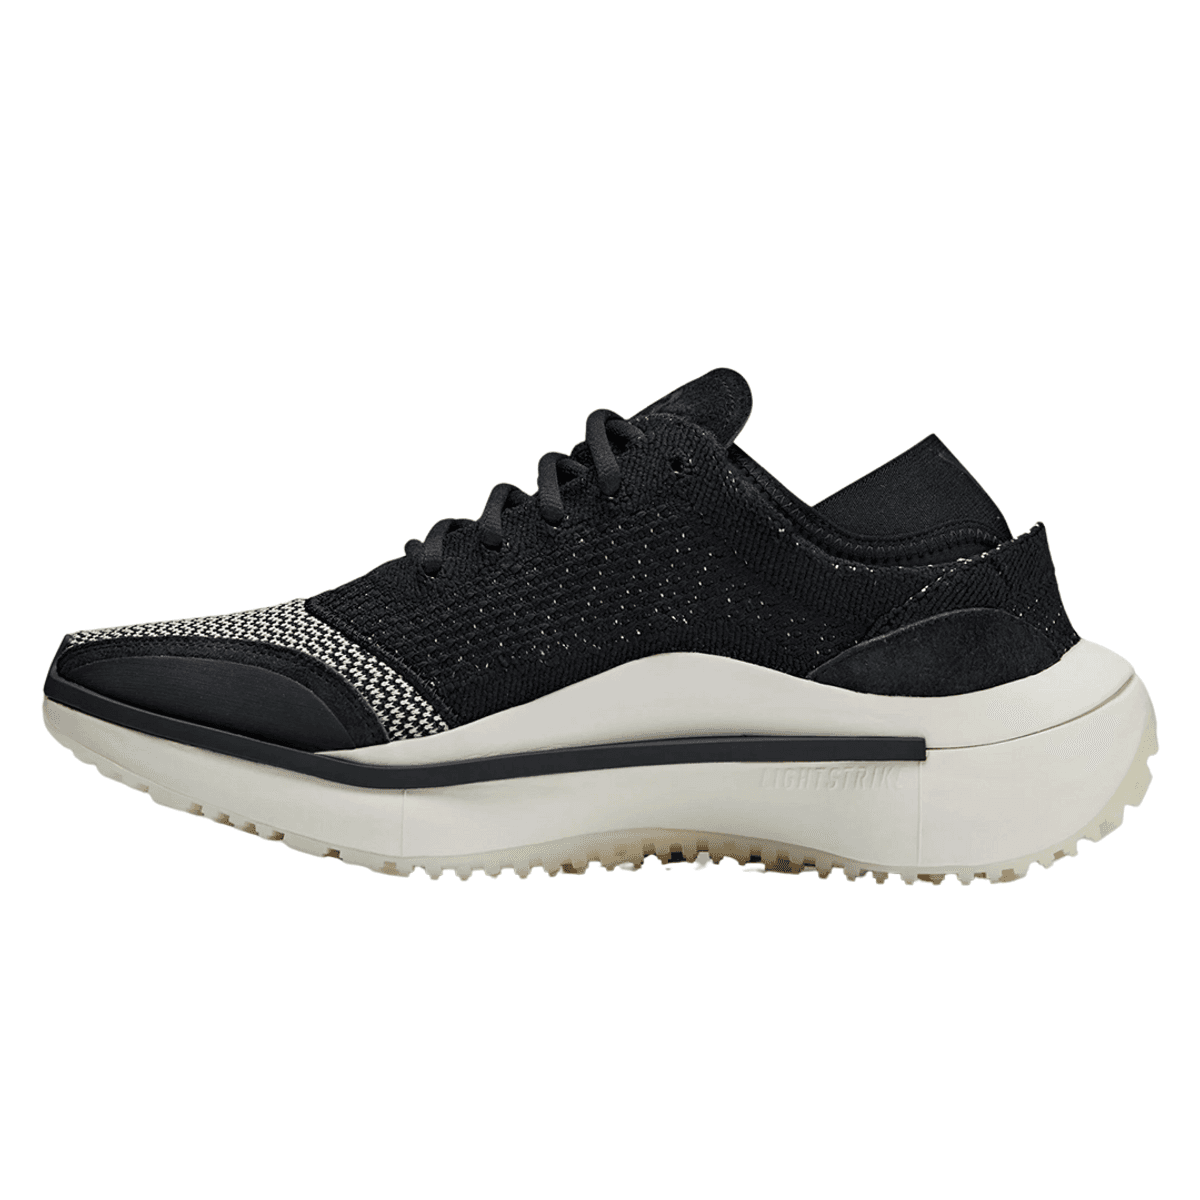 The Latest Adidas Y-3 Qisan Knit Is Now Available In A Black and White Look